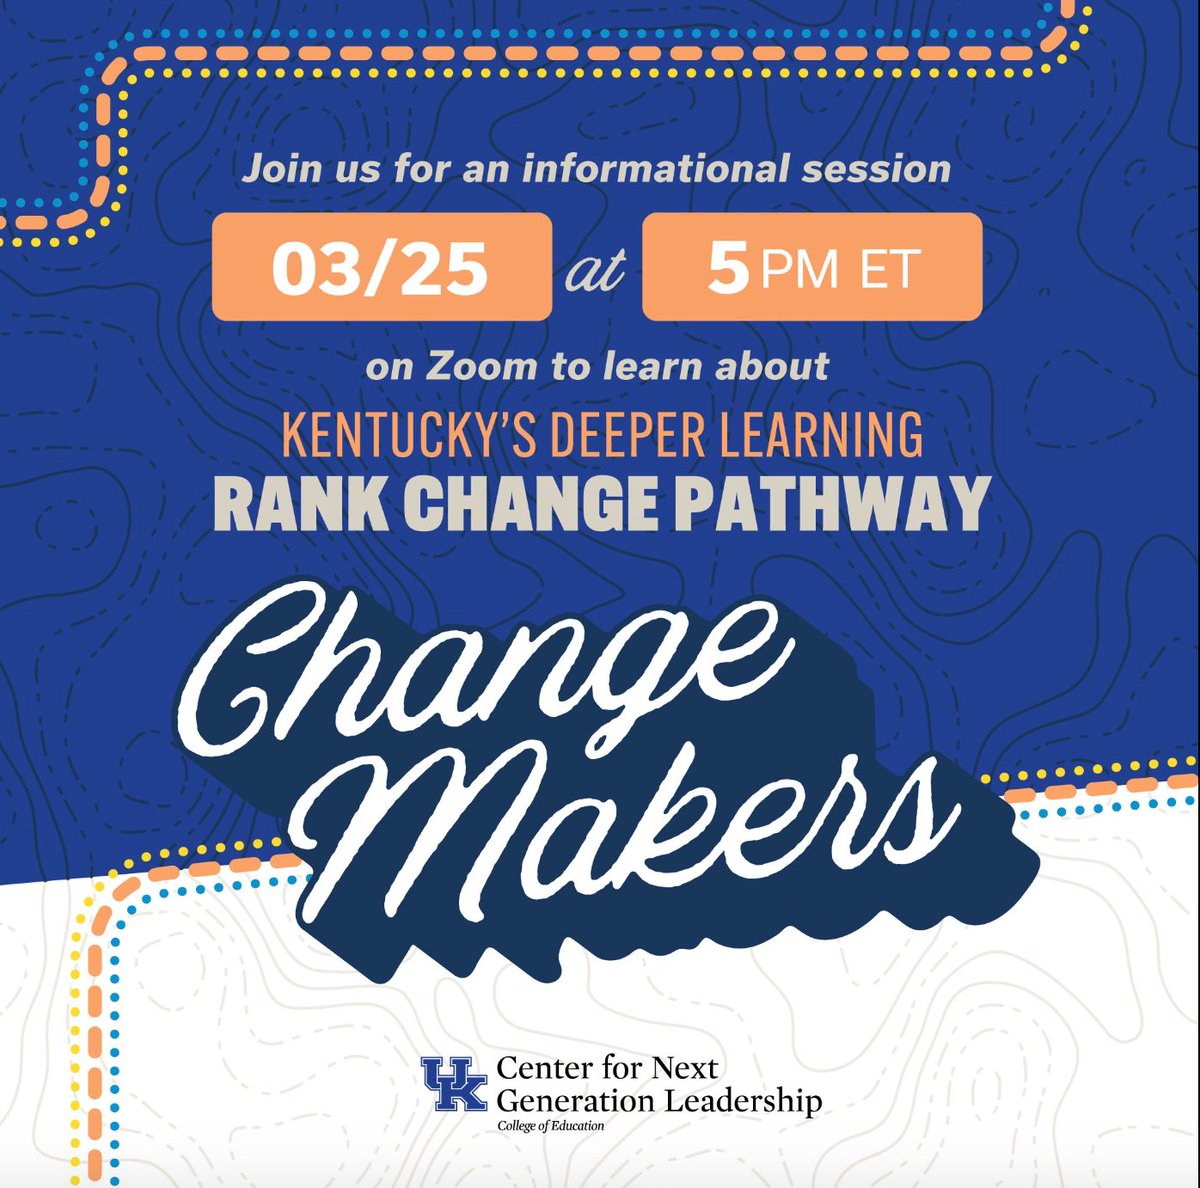 Kentucky educators: Join us Monday, March 25 for another informational webinar to learn if ChangeMakers is the right path to rank change for you! Sign up for our mailing list at tinyurl.com/RankChange2024 to get the link to zoom.